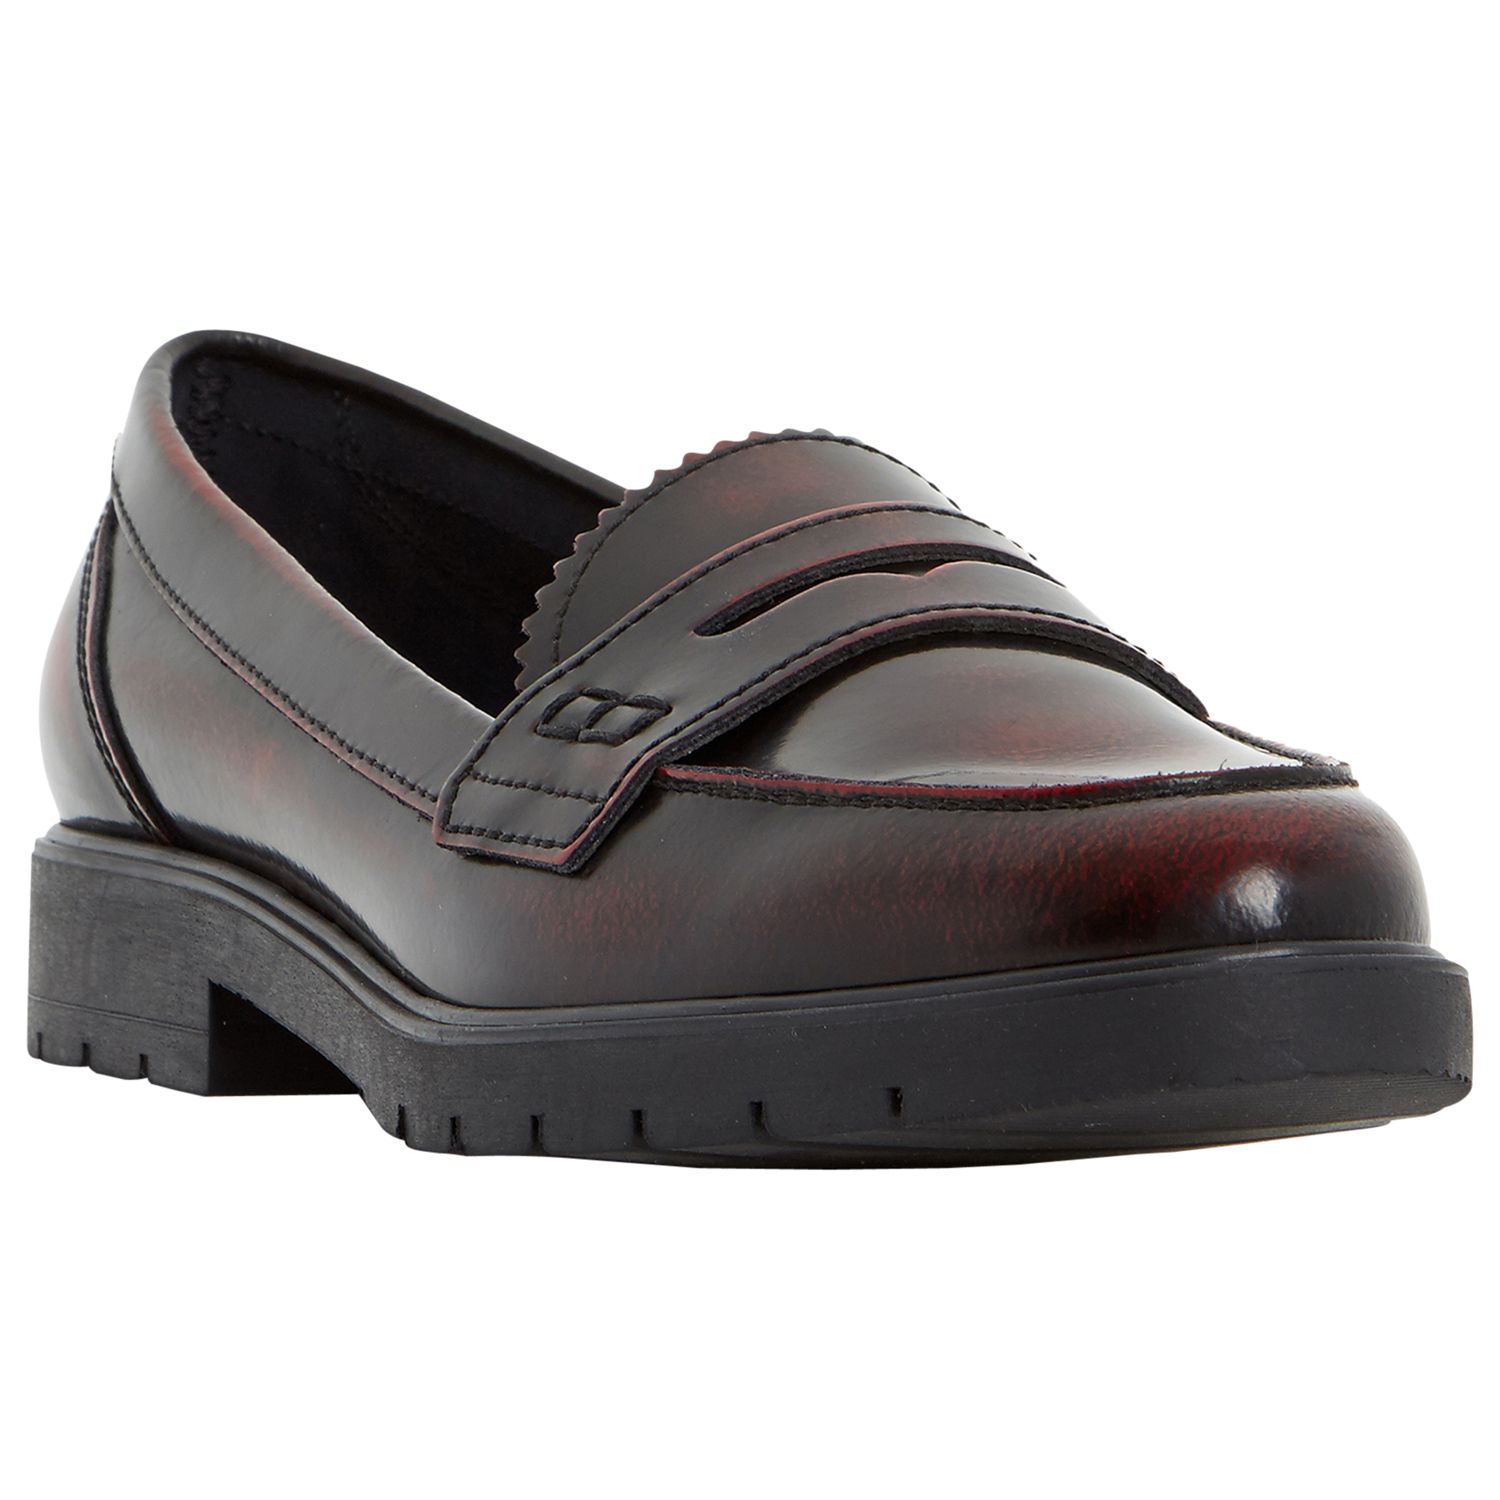 Dune Gleat Cleated Sole Loafers, Burgundy Leather at John Lewis & Partners